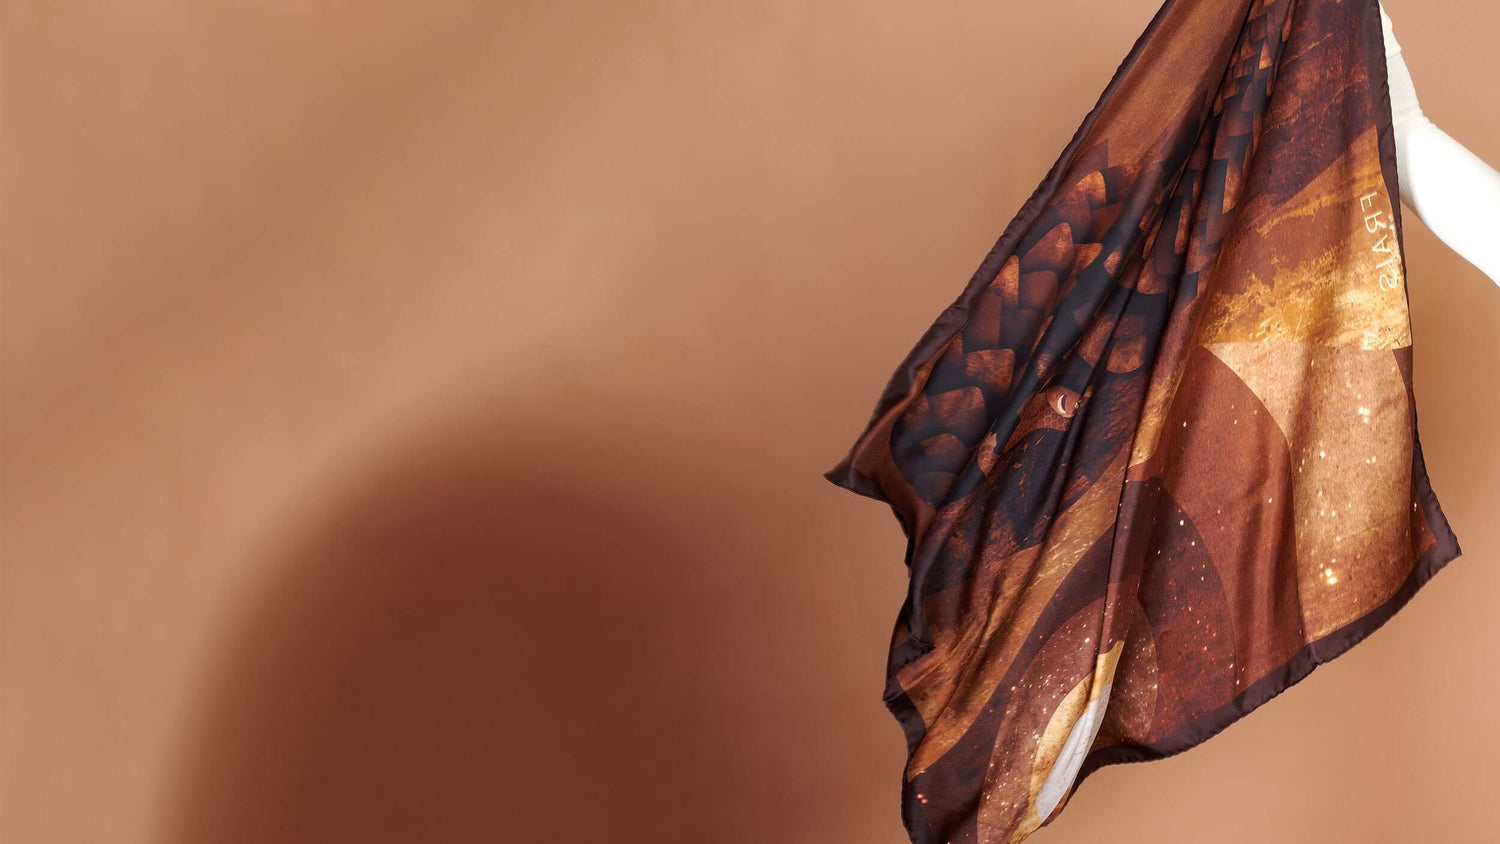 Silk Twill Scarf, Pangolin and Pangopup Print, Brown, Beige, Taupe Hues, Original Design, Made In Italy, Hand Rolled